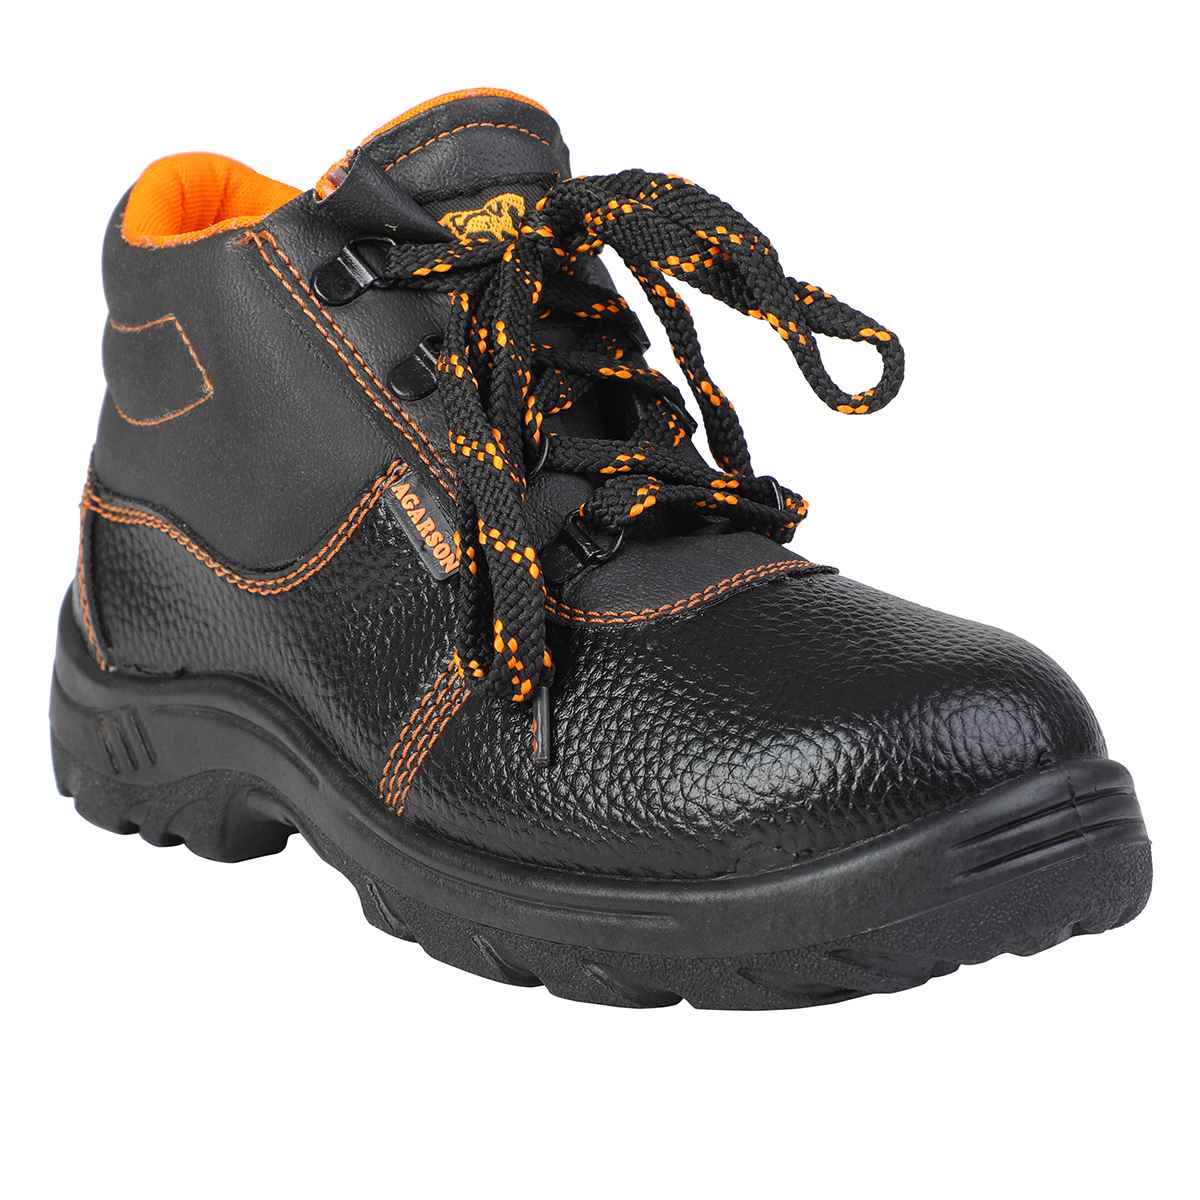 Men's Steel pointed safety shoes, men's work safety shoes, non-slip shoes.